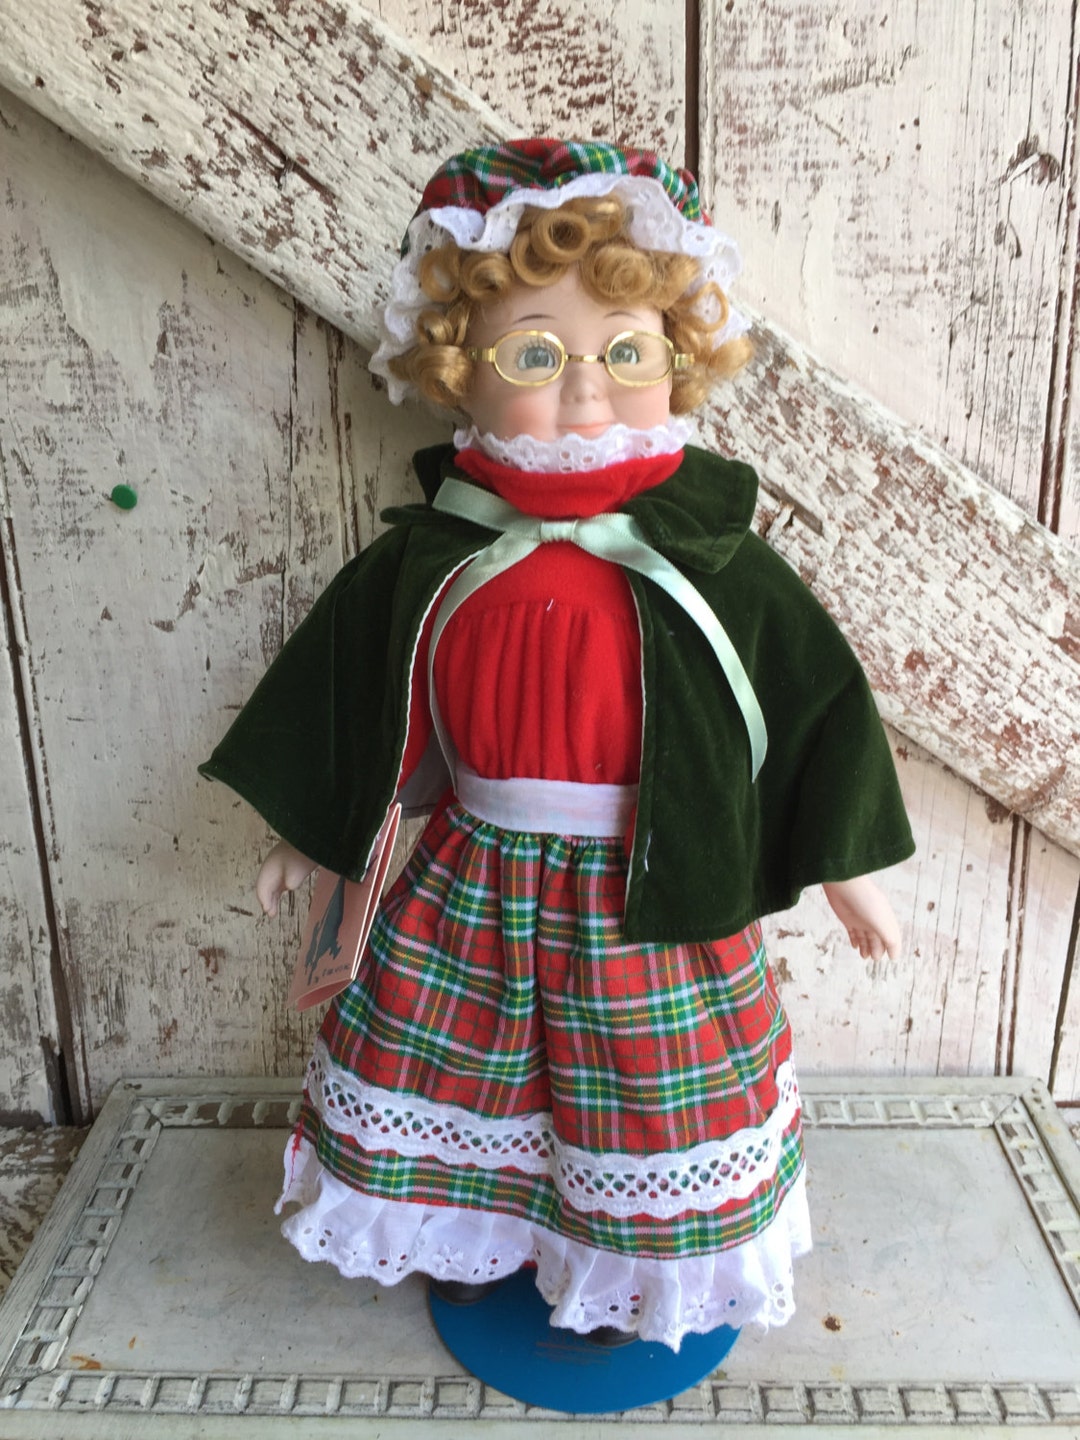 Doll Granny Doll Porcelain Red Riding Hood Granny With Glasses Plaid ...